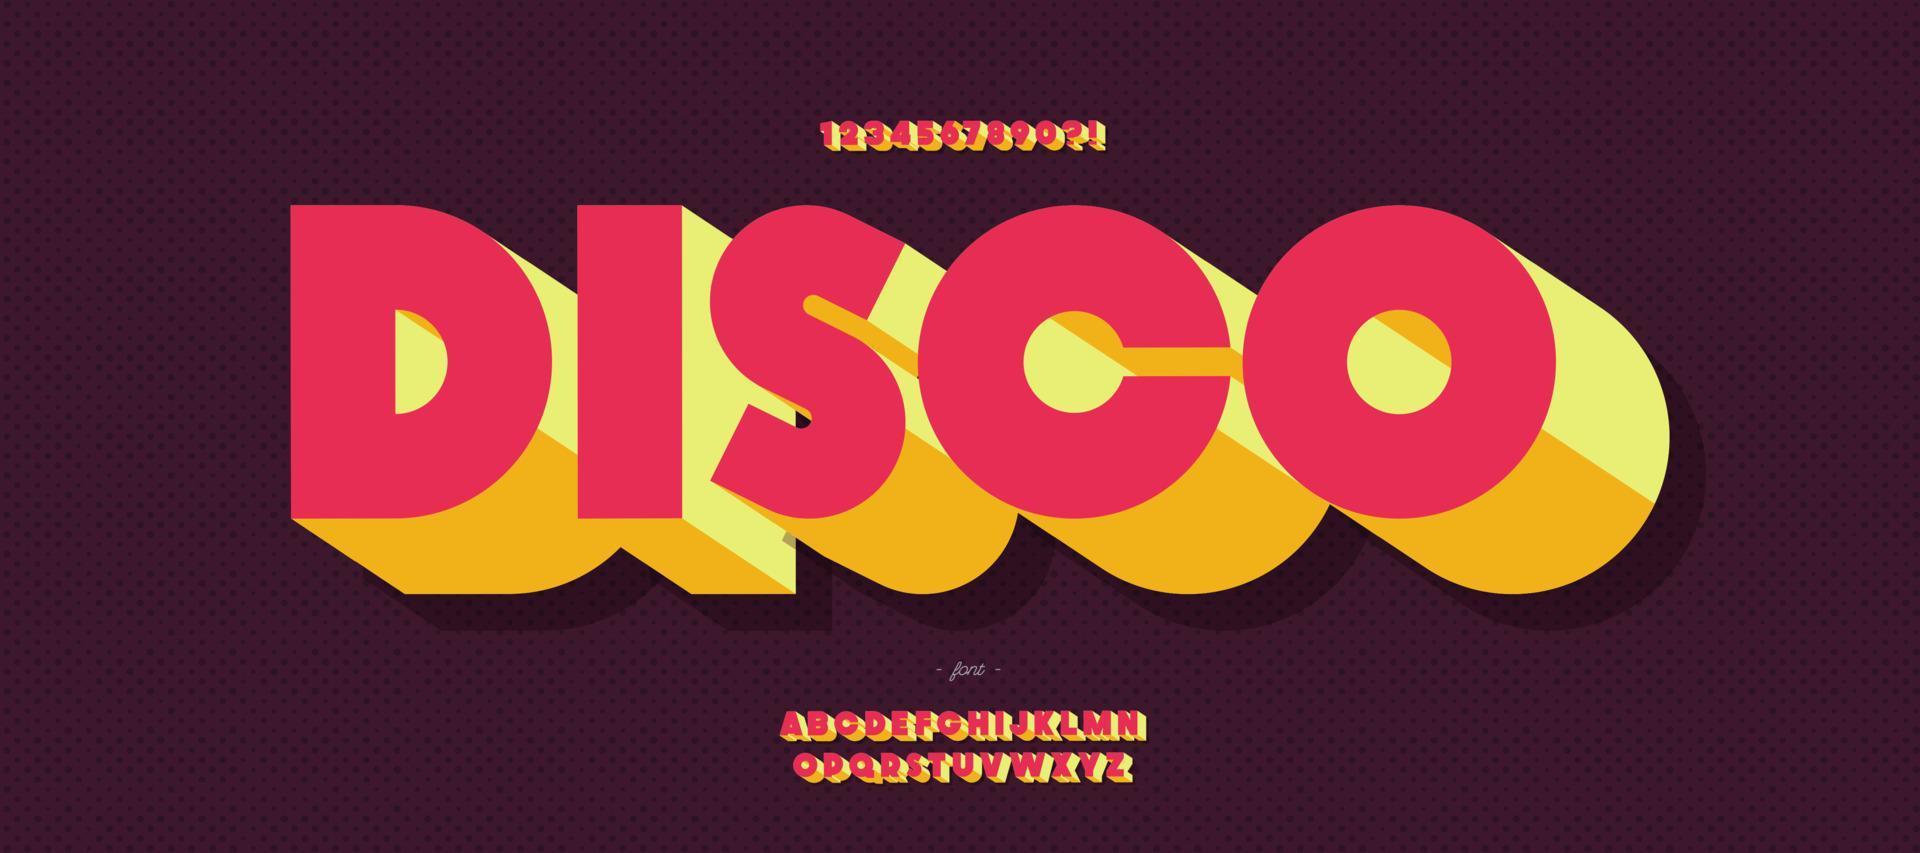 Vector disco font 3d bold style trendy typography